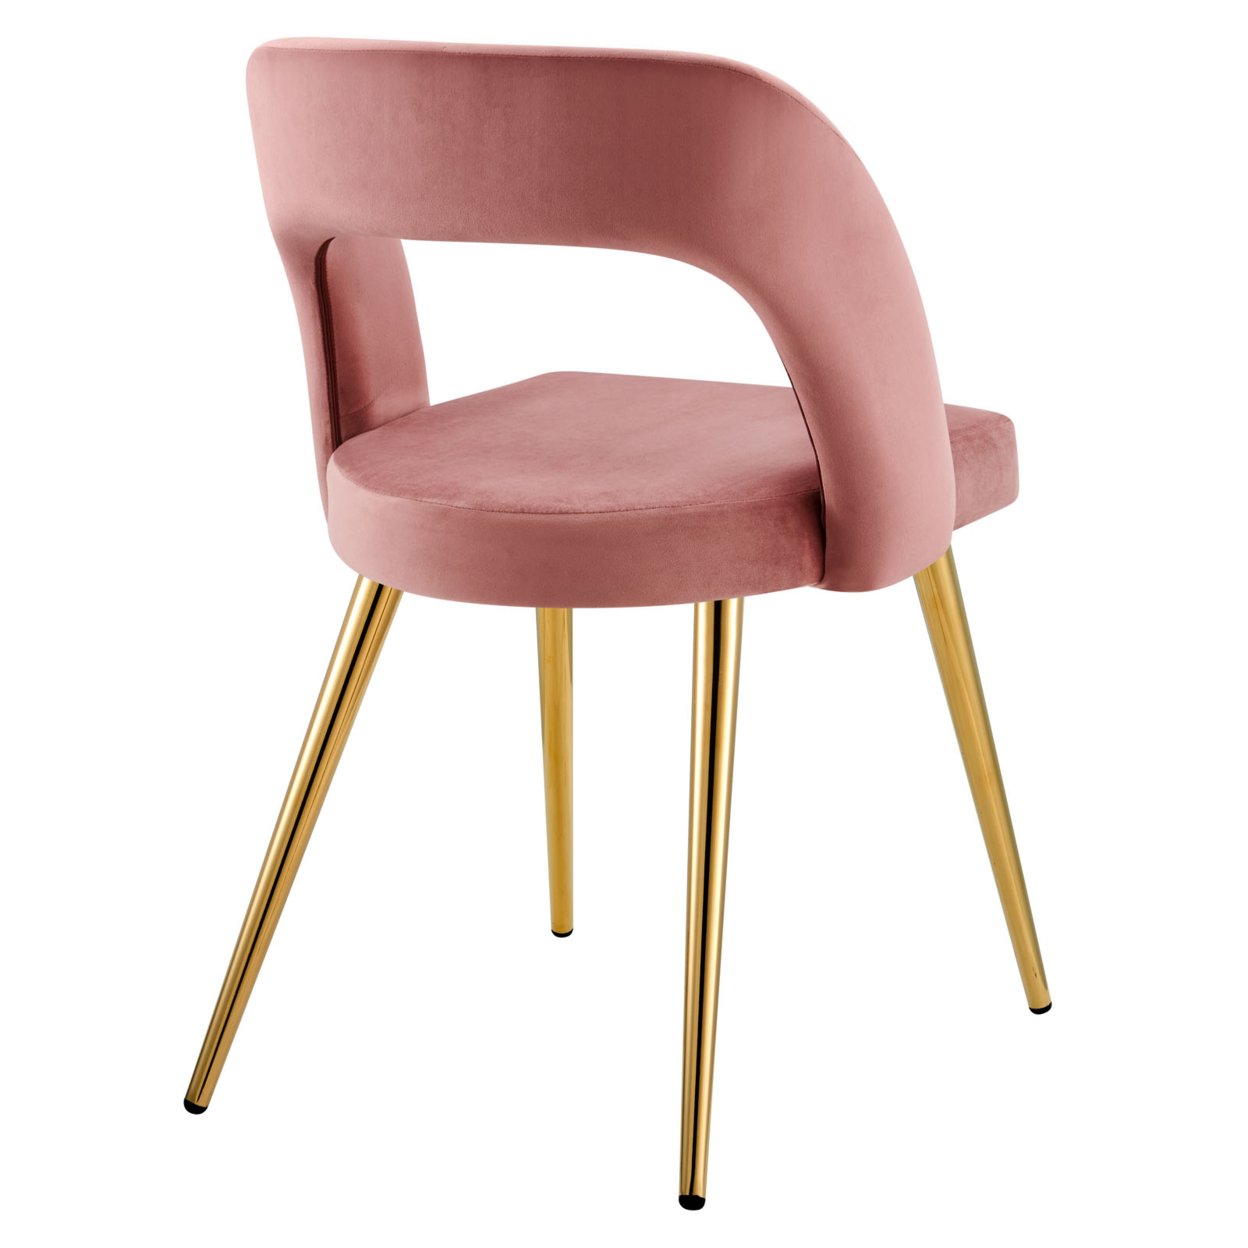 Marciano Performance Velvet Dining Chair, Gold Dusty Rose